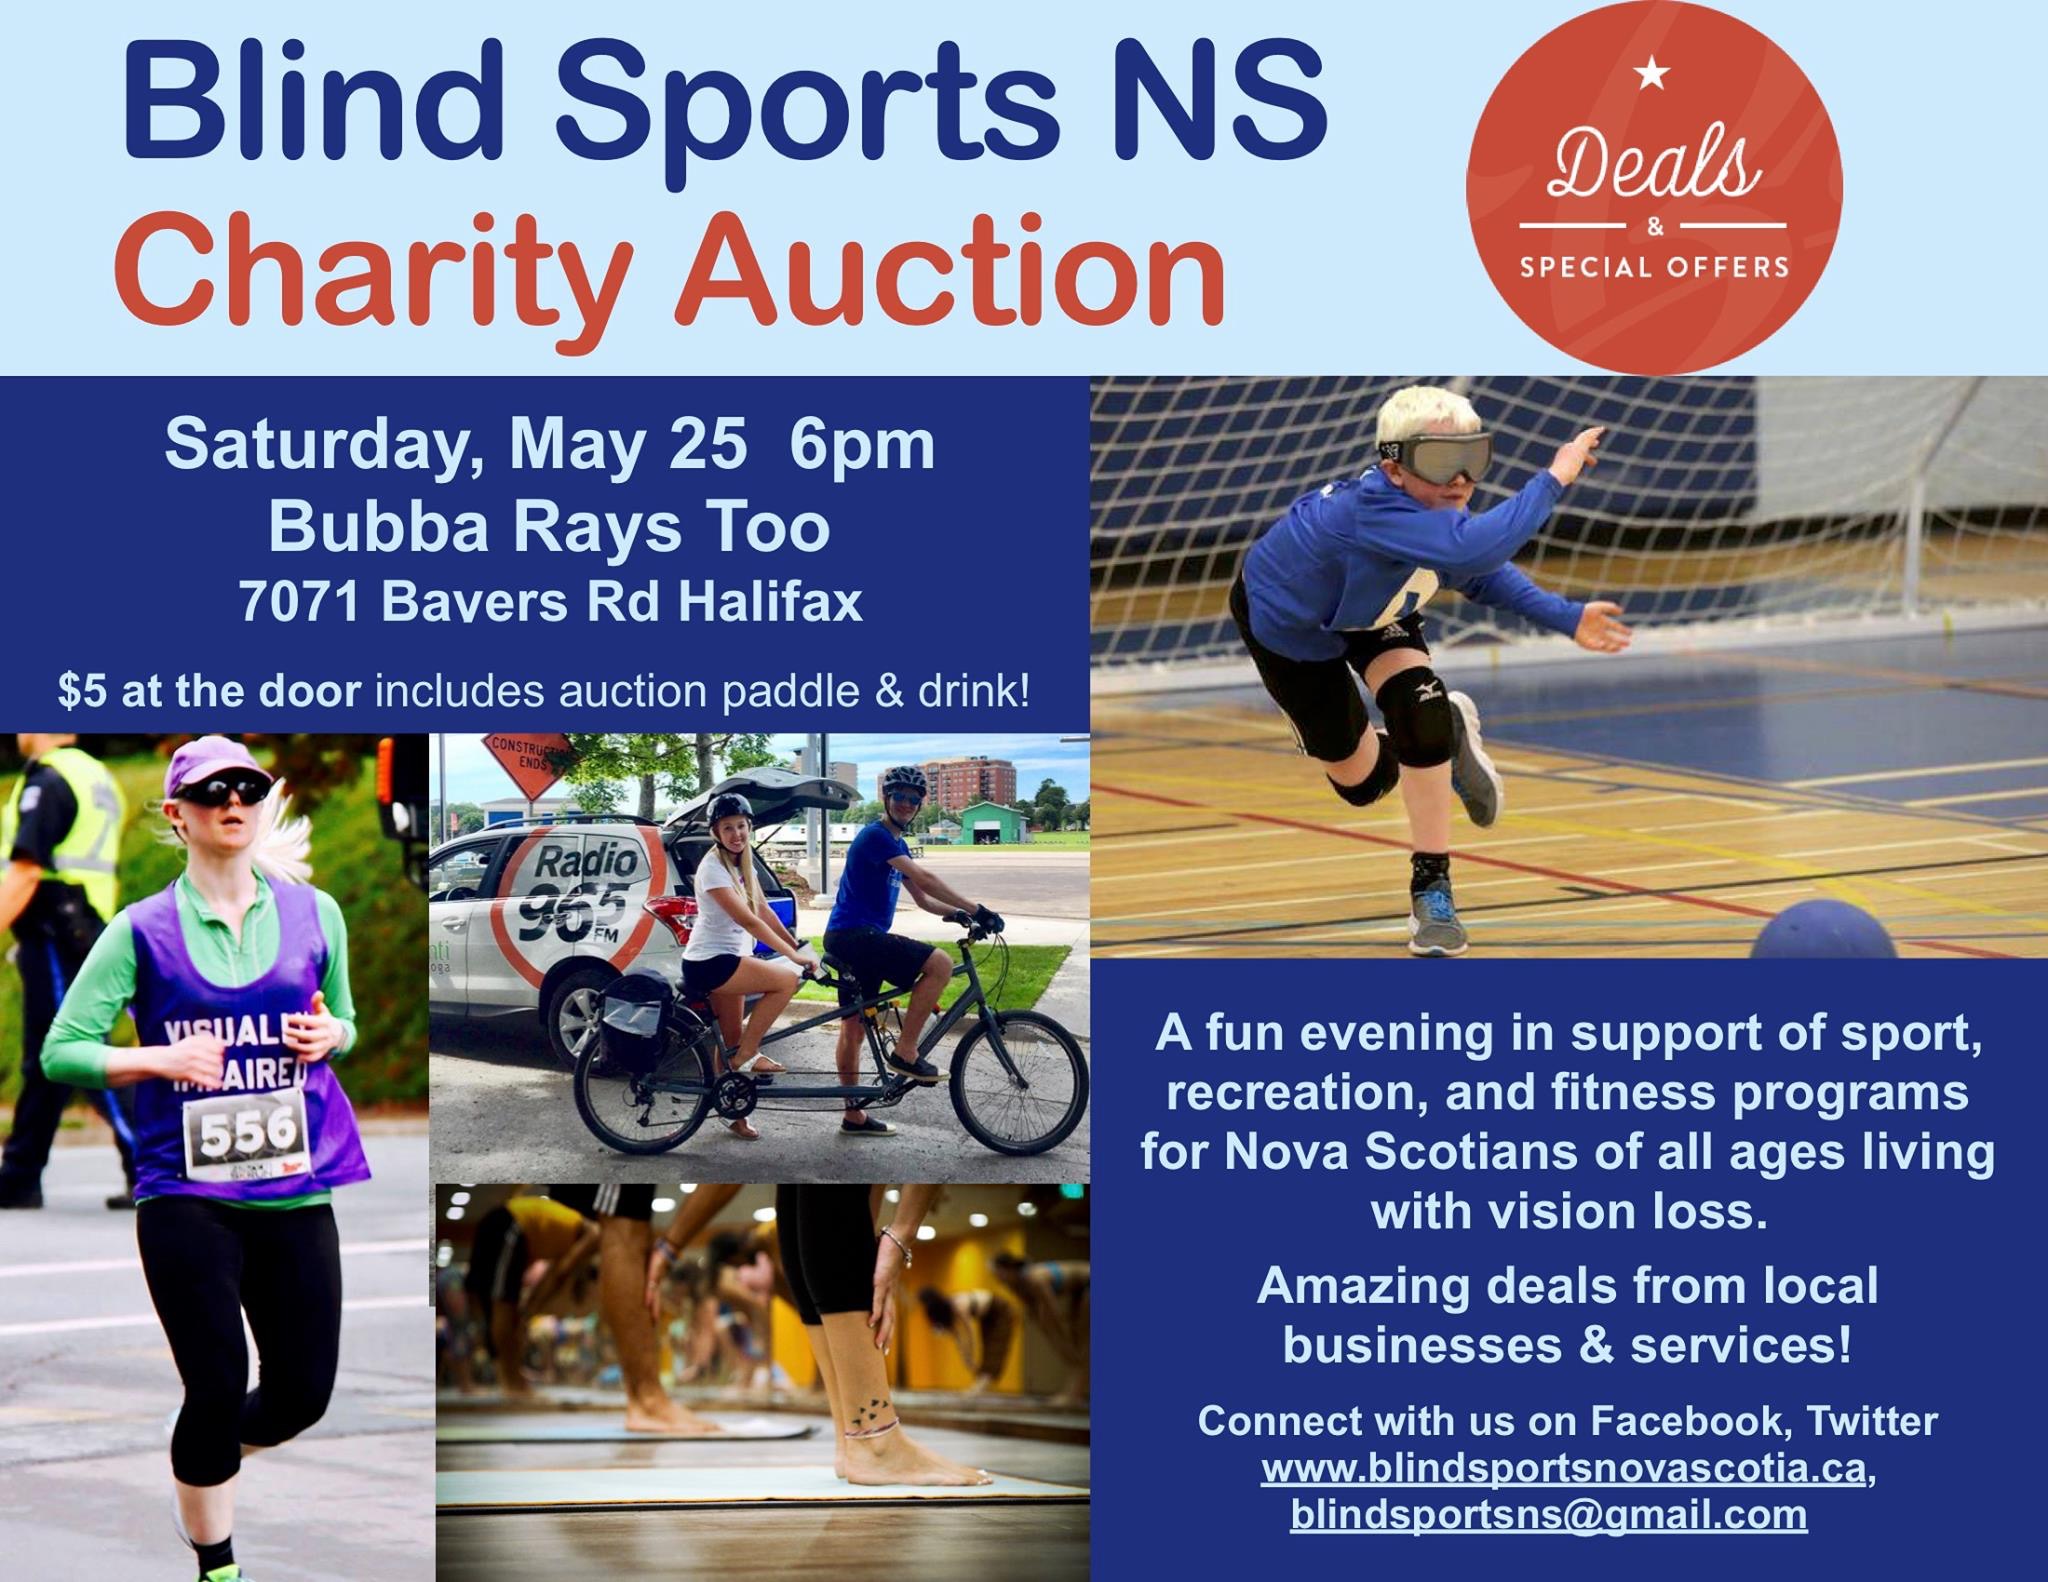 Pictured on the poster are: "Deals & special offers". A blonde woman running in a vest that reads "visually impaired", a pair on a tandem bike outdoors, a young goal ball player in eyeshades, and a group of ankles & feet in a yoga class.  Blind Sports NS Charity Auction Saturday, May 25 6pm Bubba Rays Too 7071 Bayers Rd Halifax $5 at the door includes auction paddle & drink! A fun evening in support of sport, recreation, and fitness programs for Nova Scotians of all ages living with vision loss. Amazing deals from local businesses & services! Connect with us on Facebook, Twitter www.blindsportsnovascotia.ca, blindsportsns@gmail.com